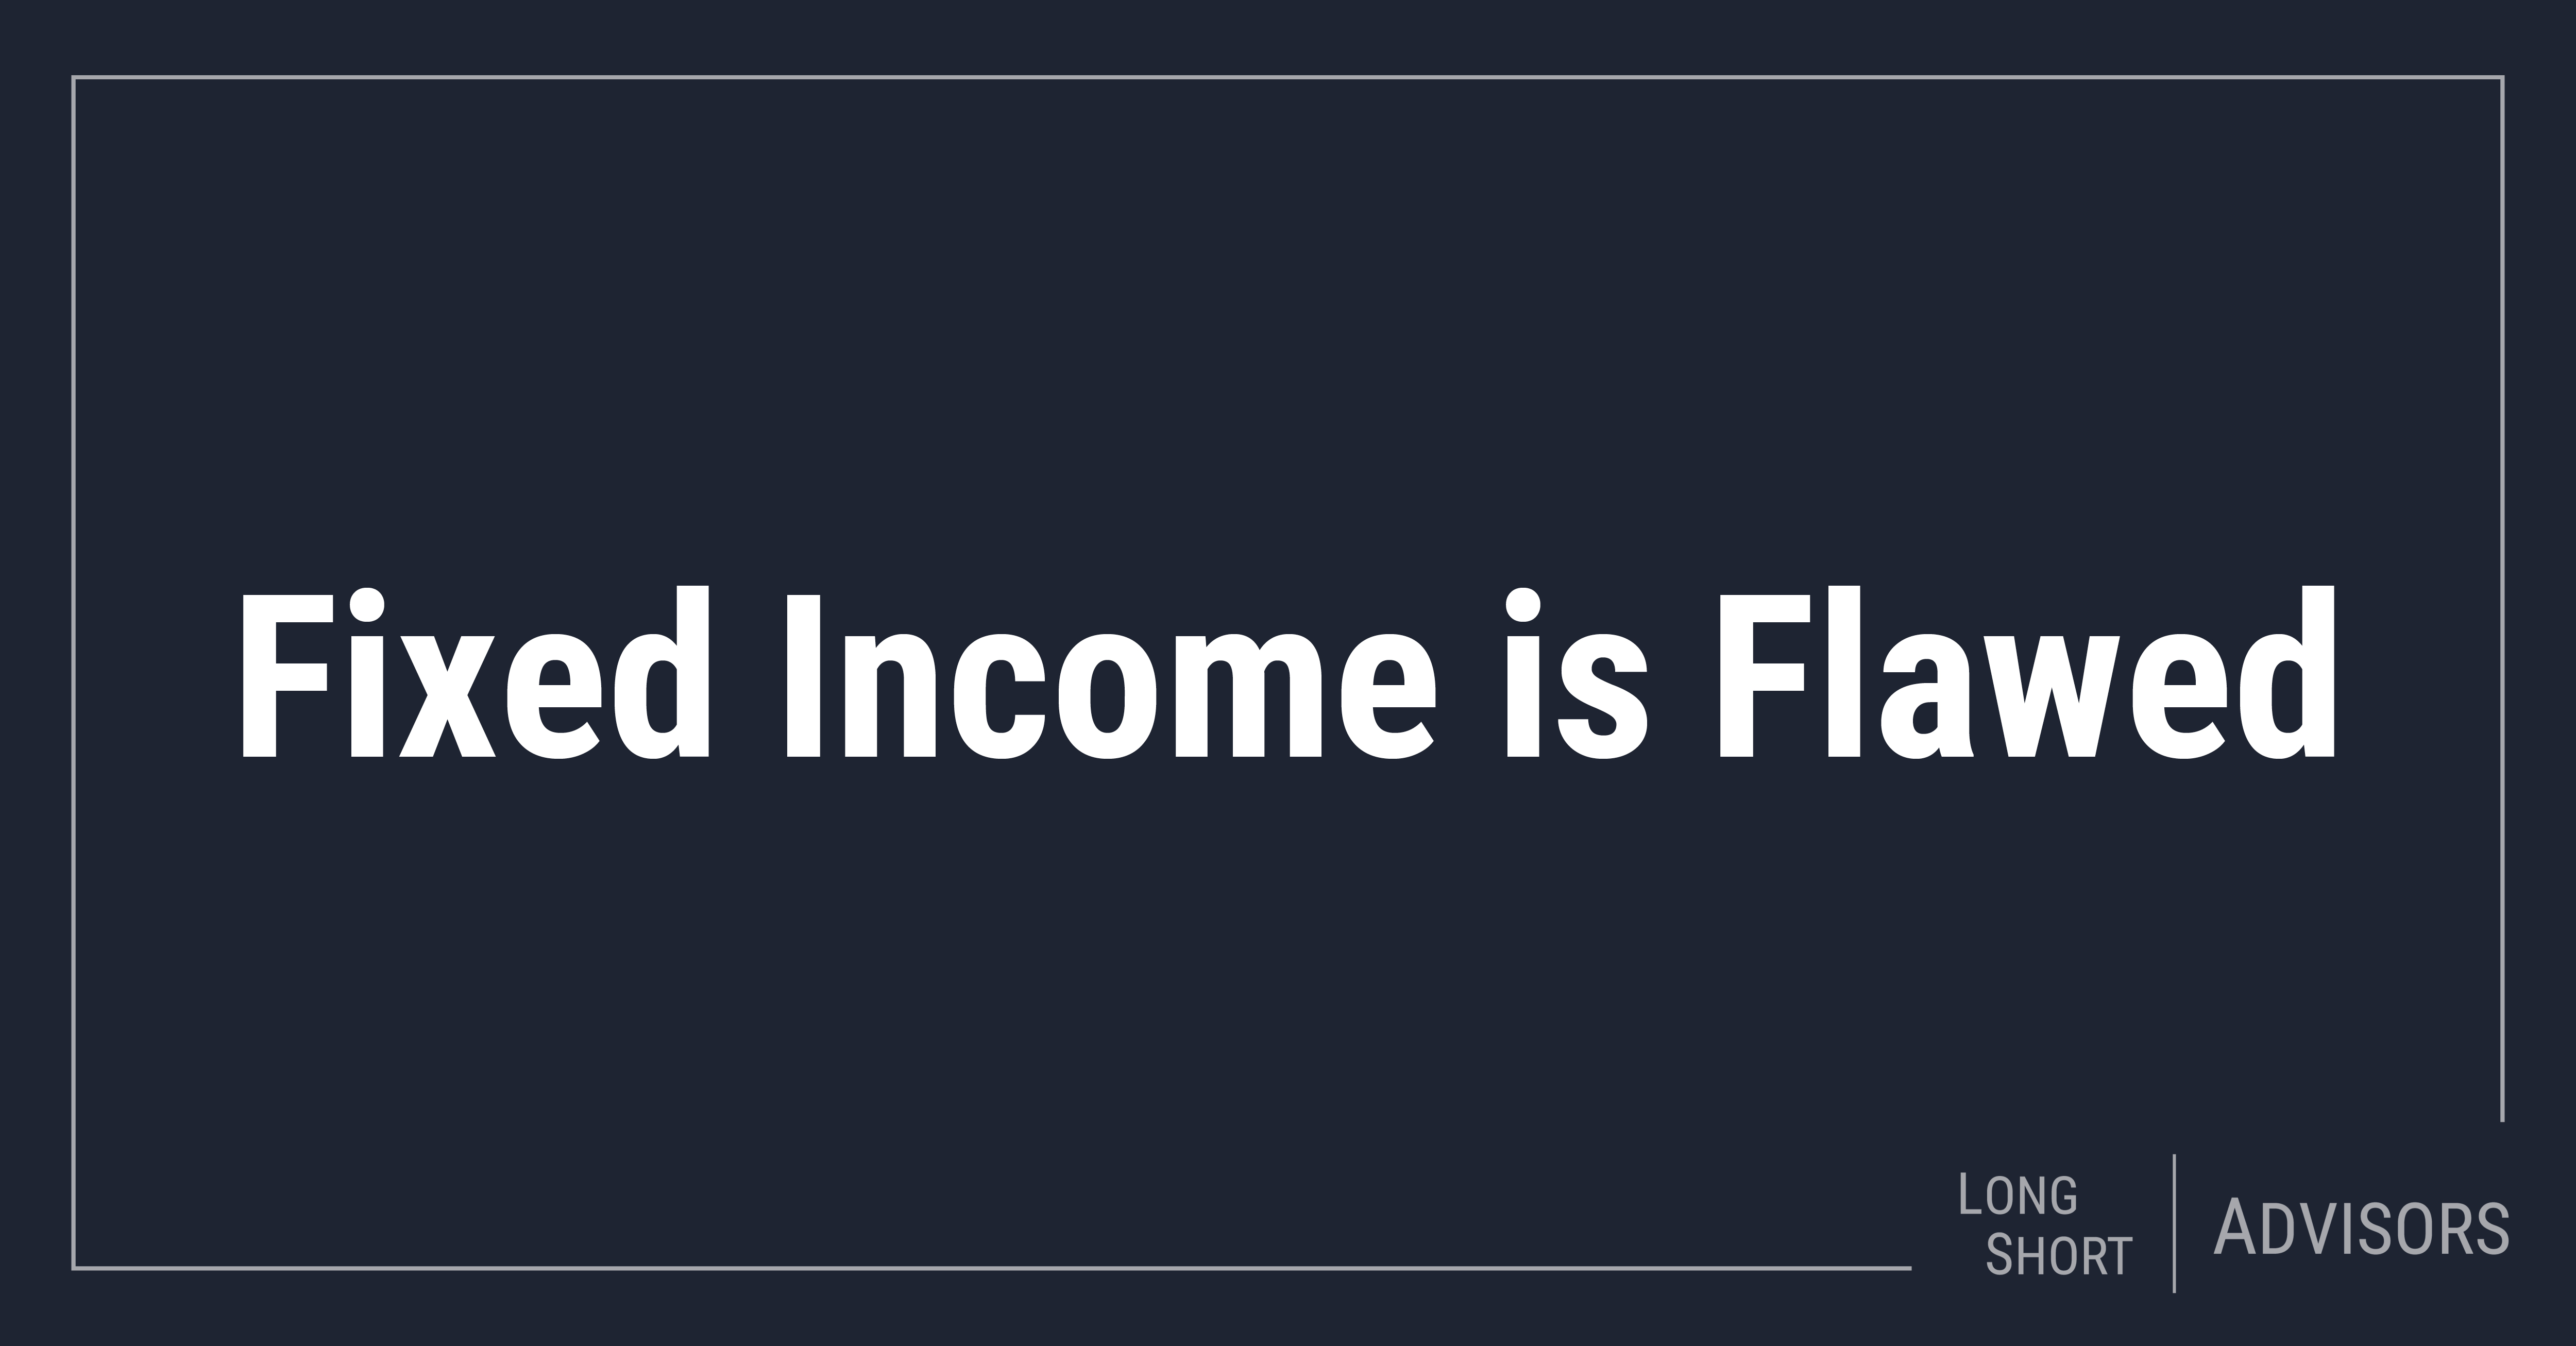 Fixed Income is Flawed